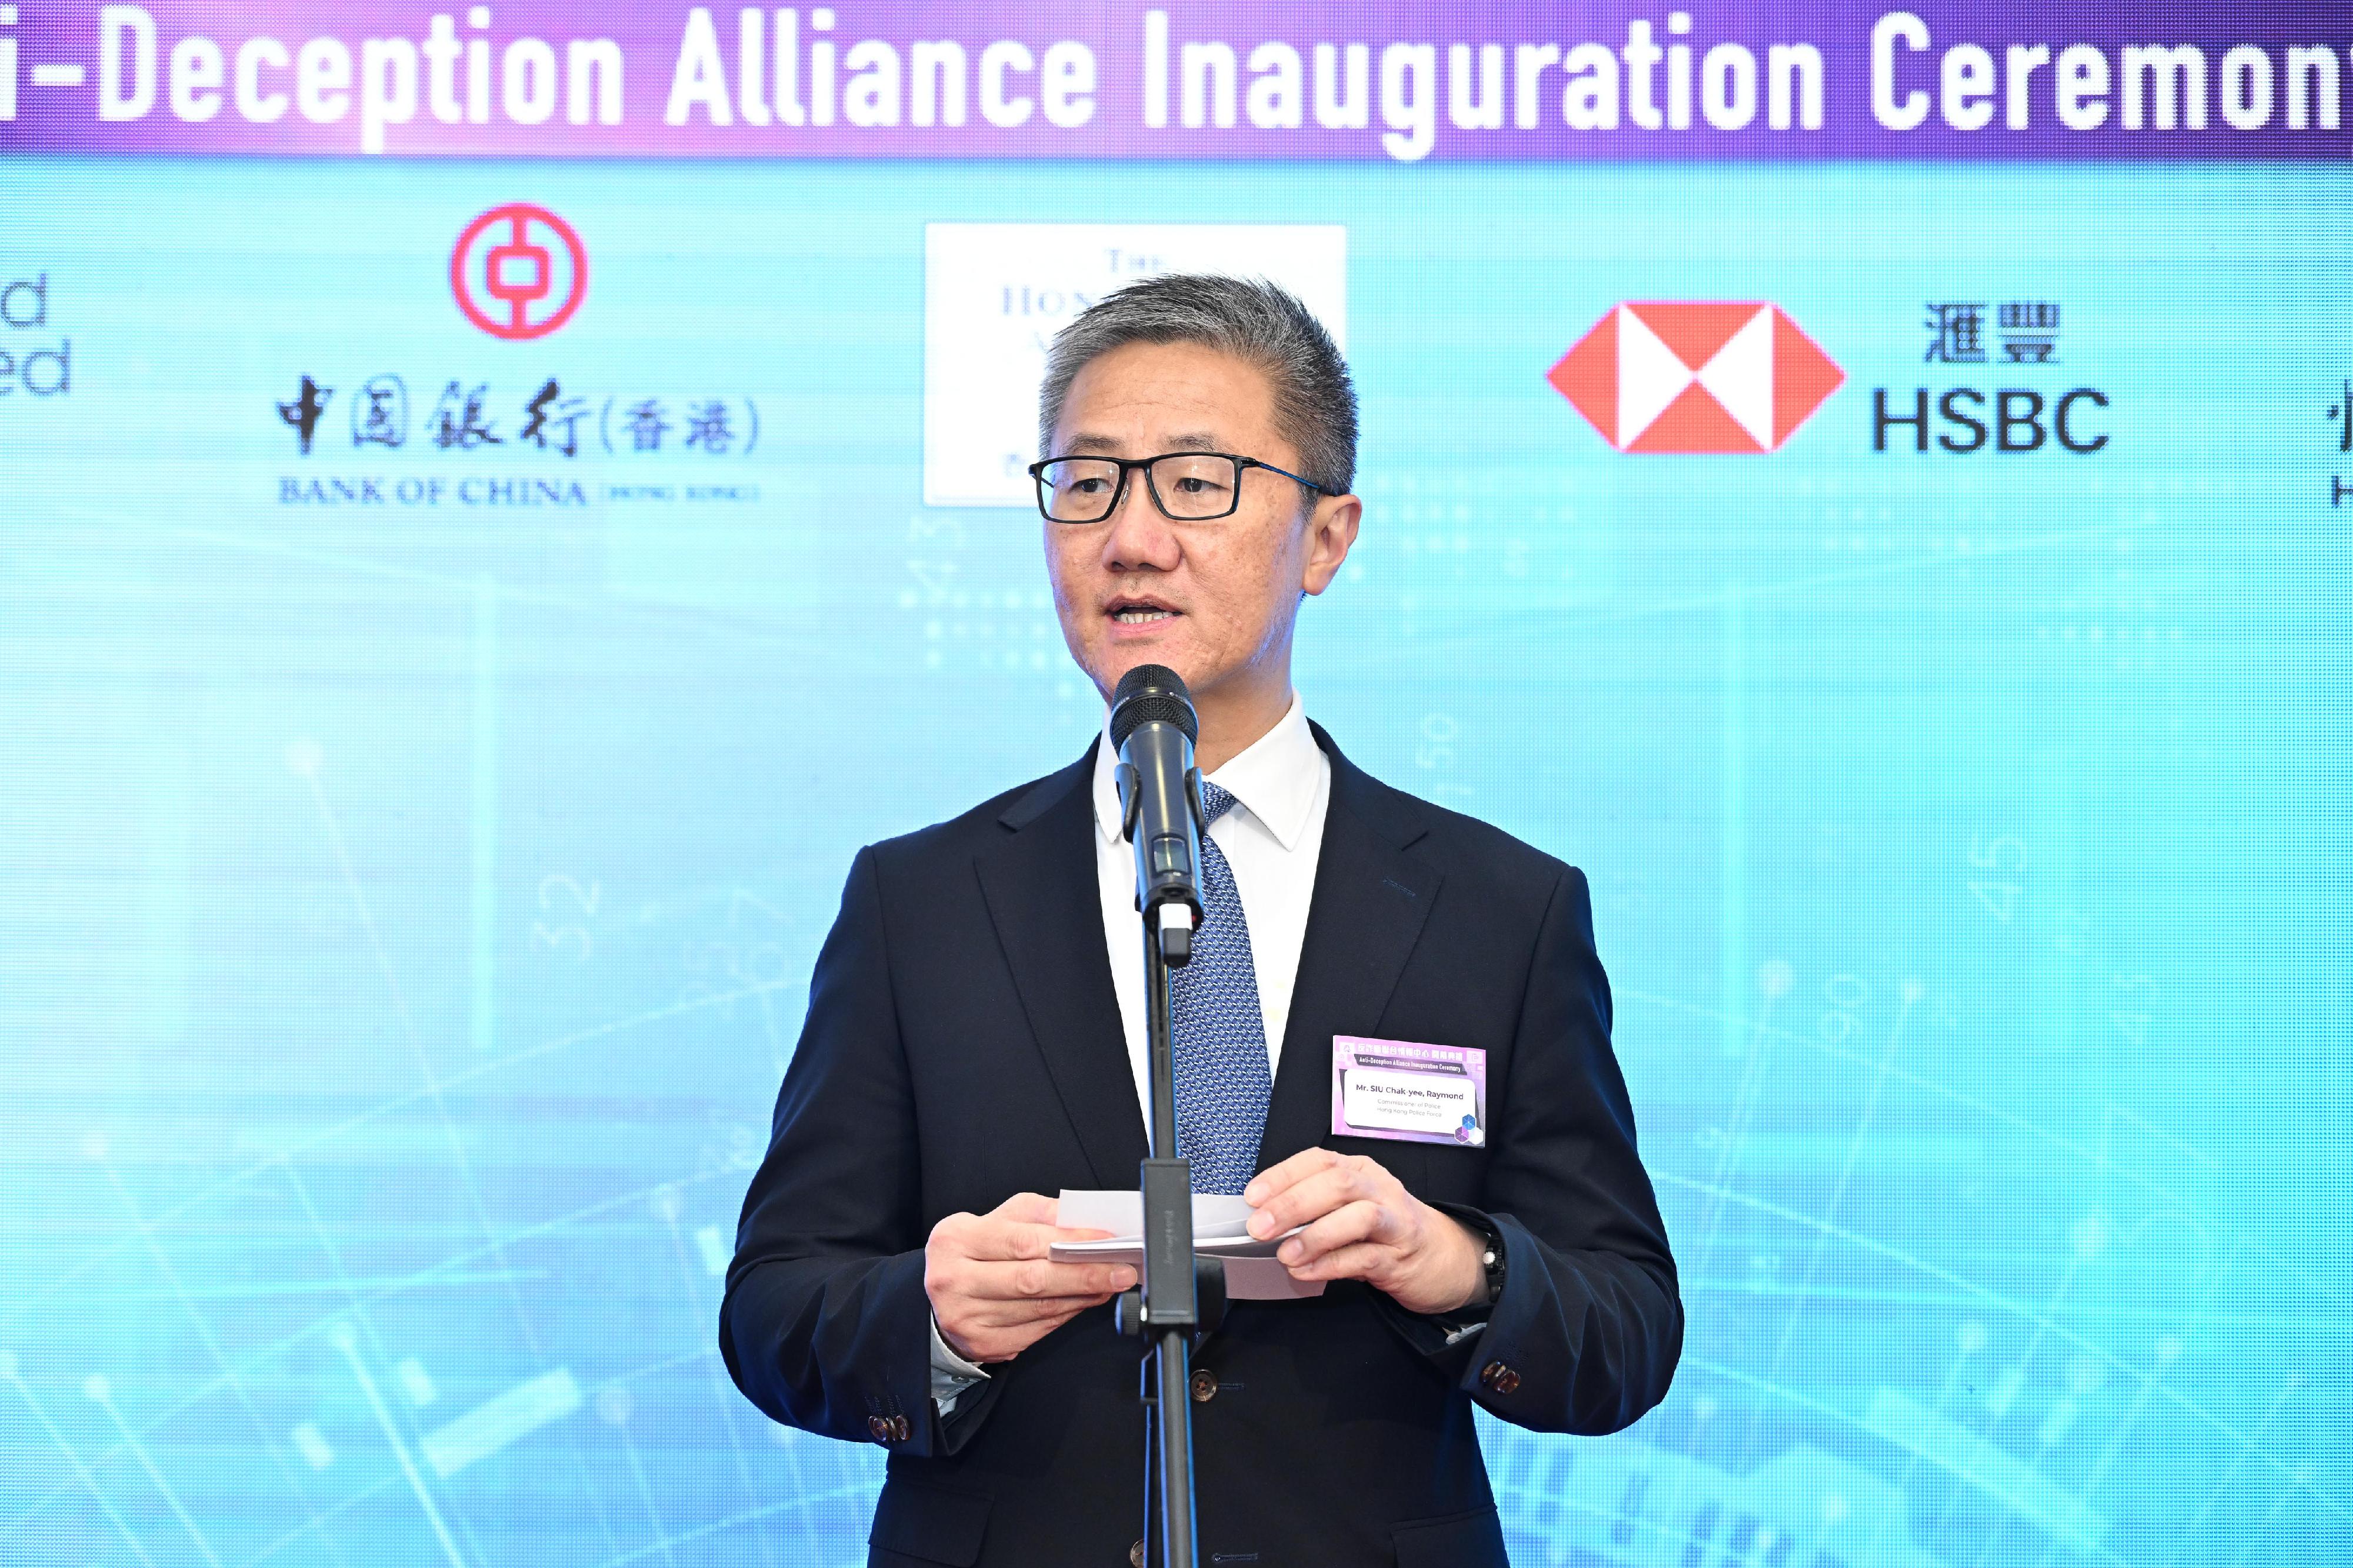 The Hong Kong Police Force (HKPF) held the inauguration ceremony for the Anti-Deception Alliance today (November 24). Photo shows the Commissioner of Police, Mr Siu Chak-yee, delivering a speech at the ceremony.